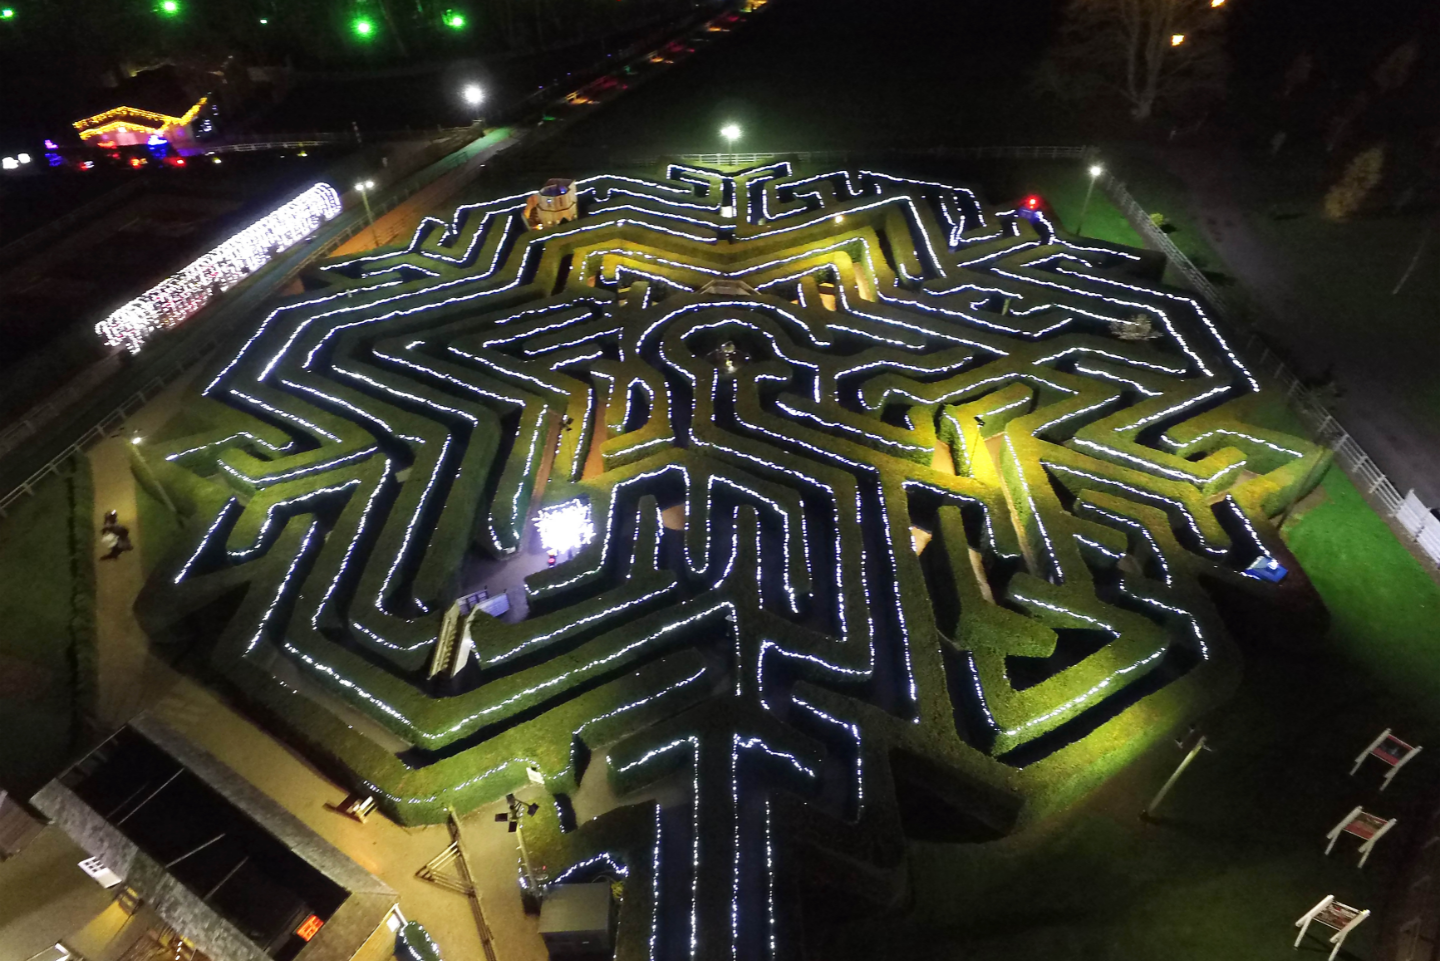 Maze shaped into a snowflake, called the Snowflake Maze at Stockeld Park.